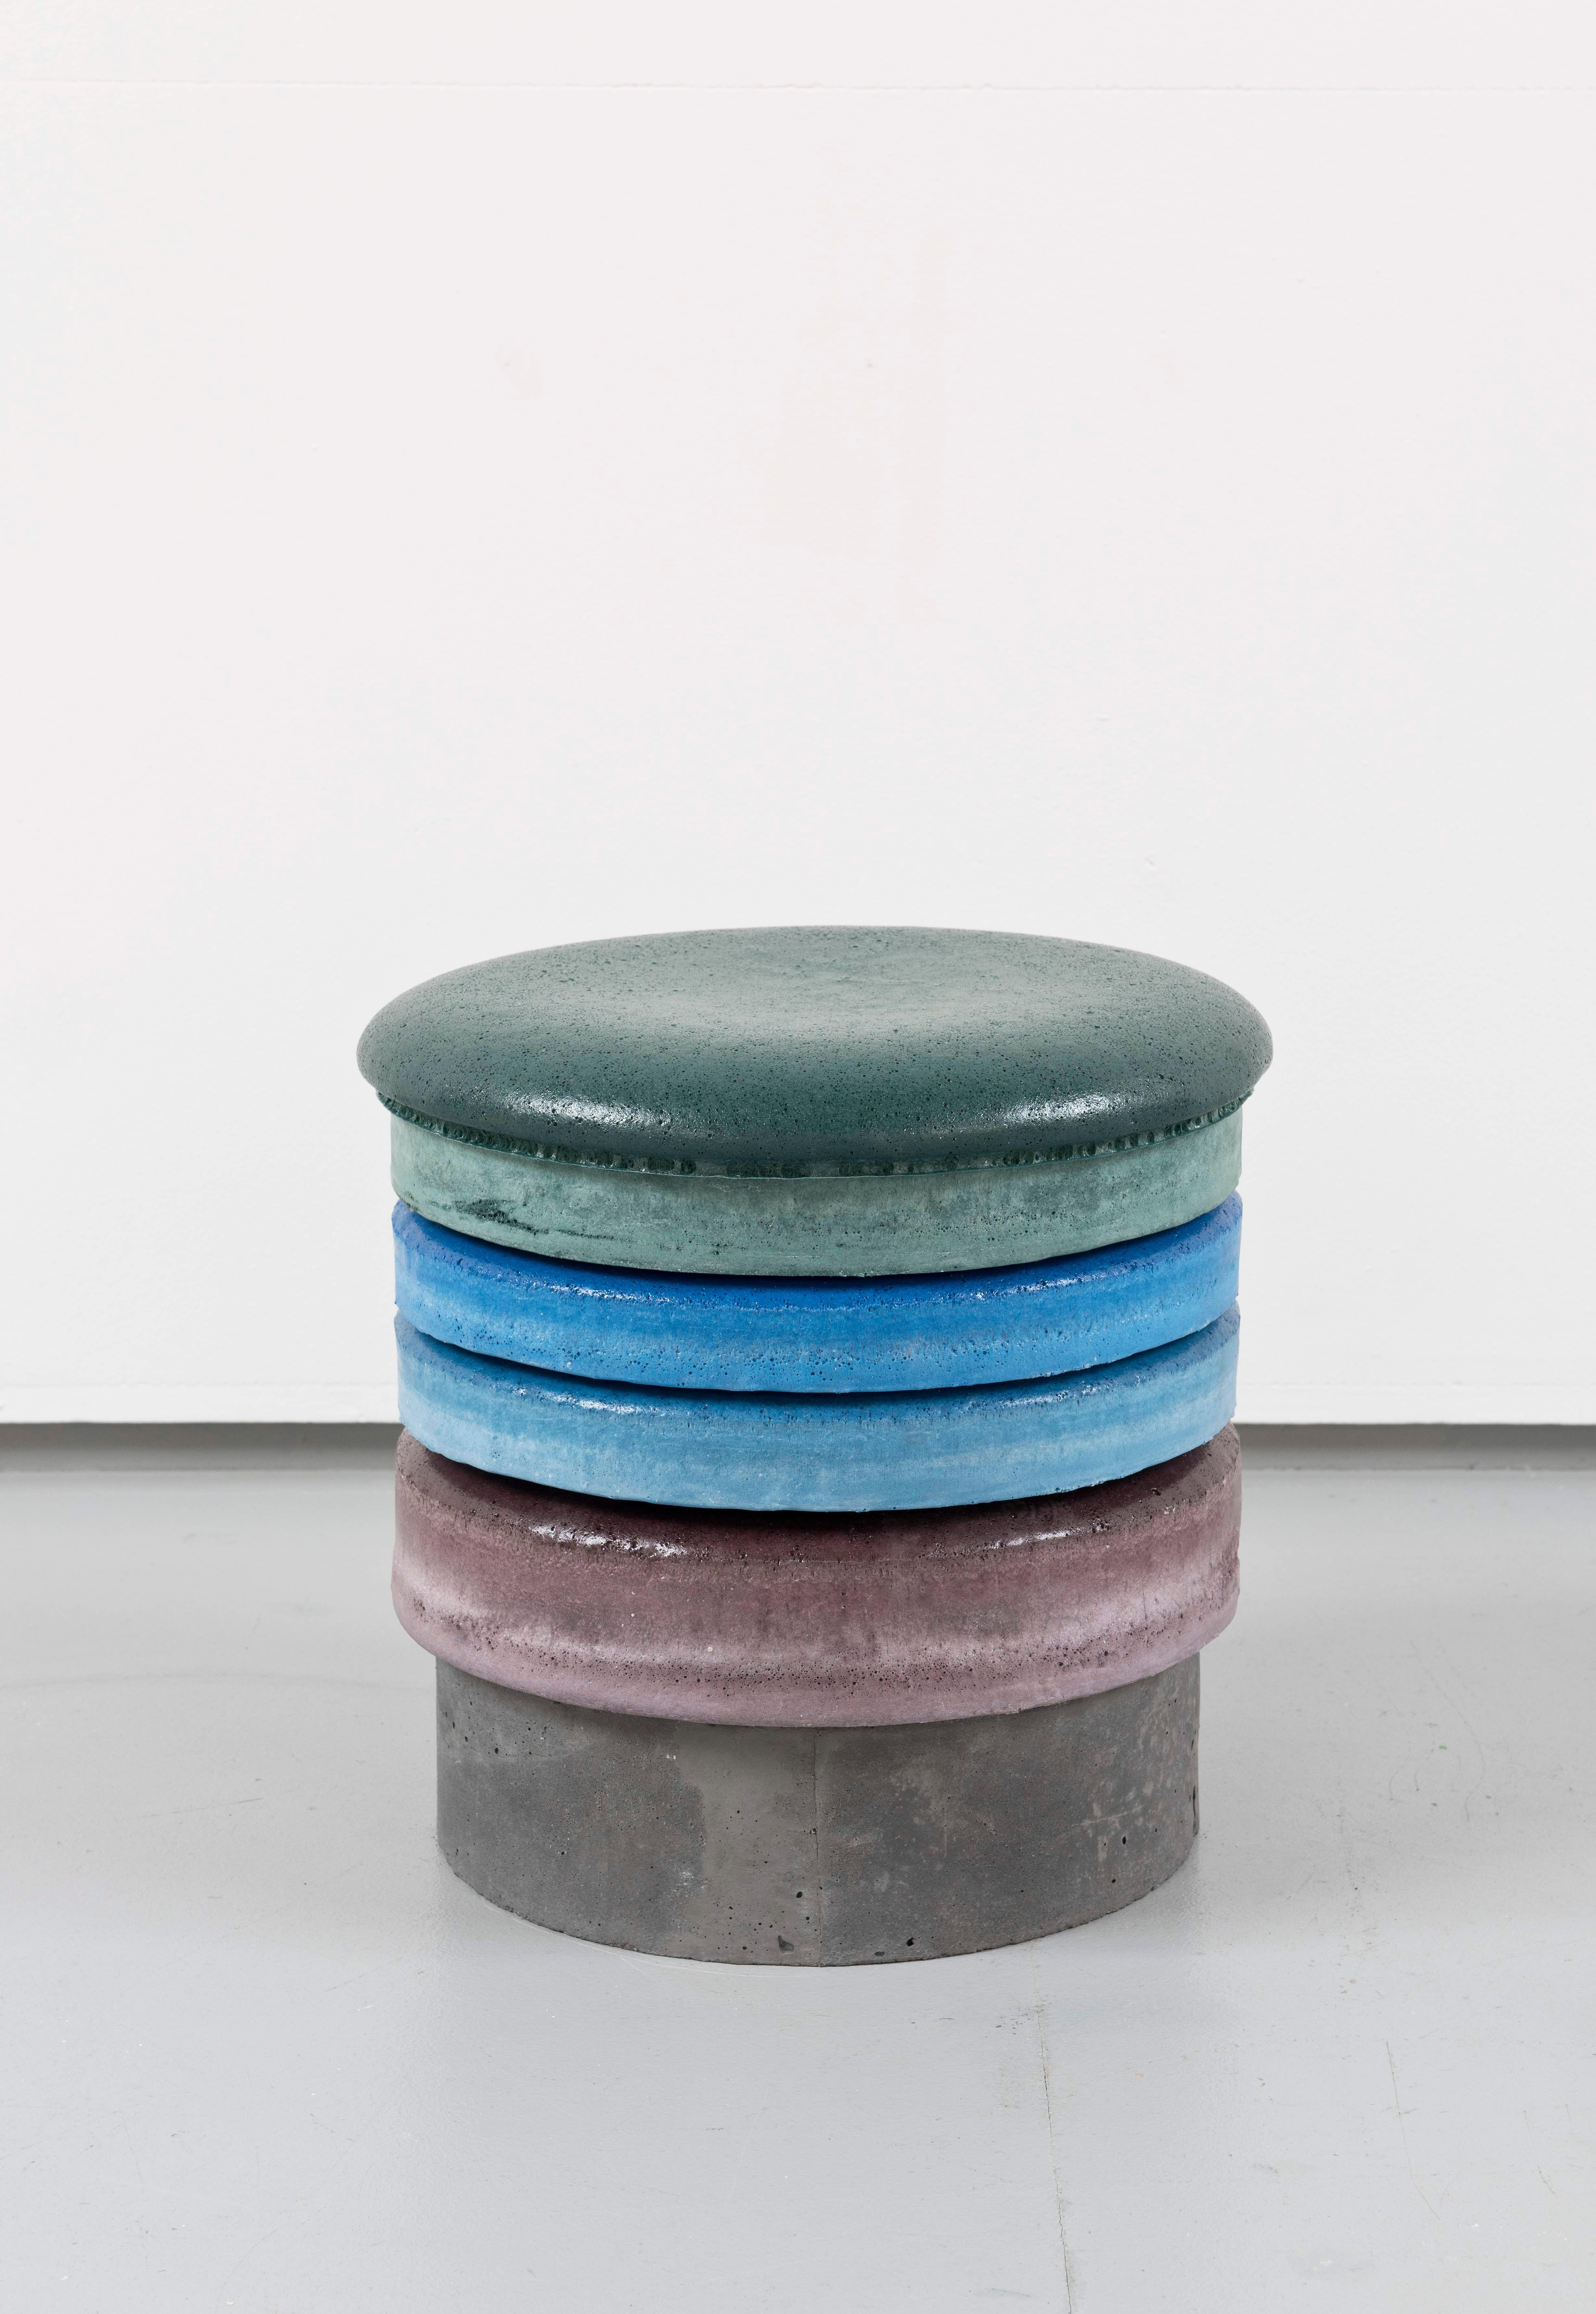 Cristian Andersen
Macaron Stool, 2020
Each unique, signed by the artist
Polyurethane, pigments, concrete and cork
Measures: H 39 cm (15 3/8 in) ø 37 cm

Cristian Andersen (*1974) has been working at the interface between design and sculpture